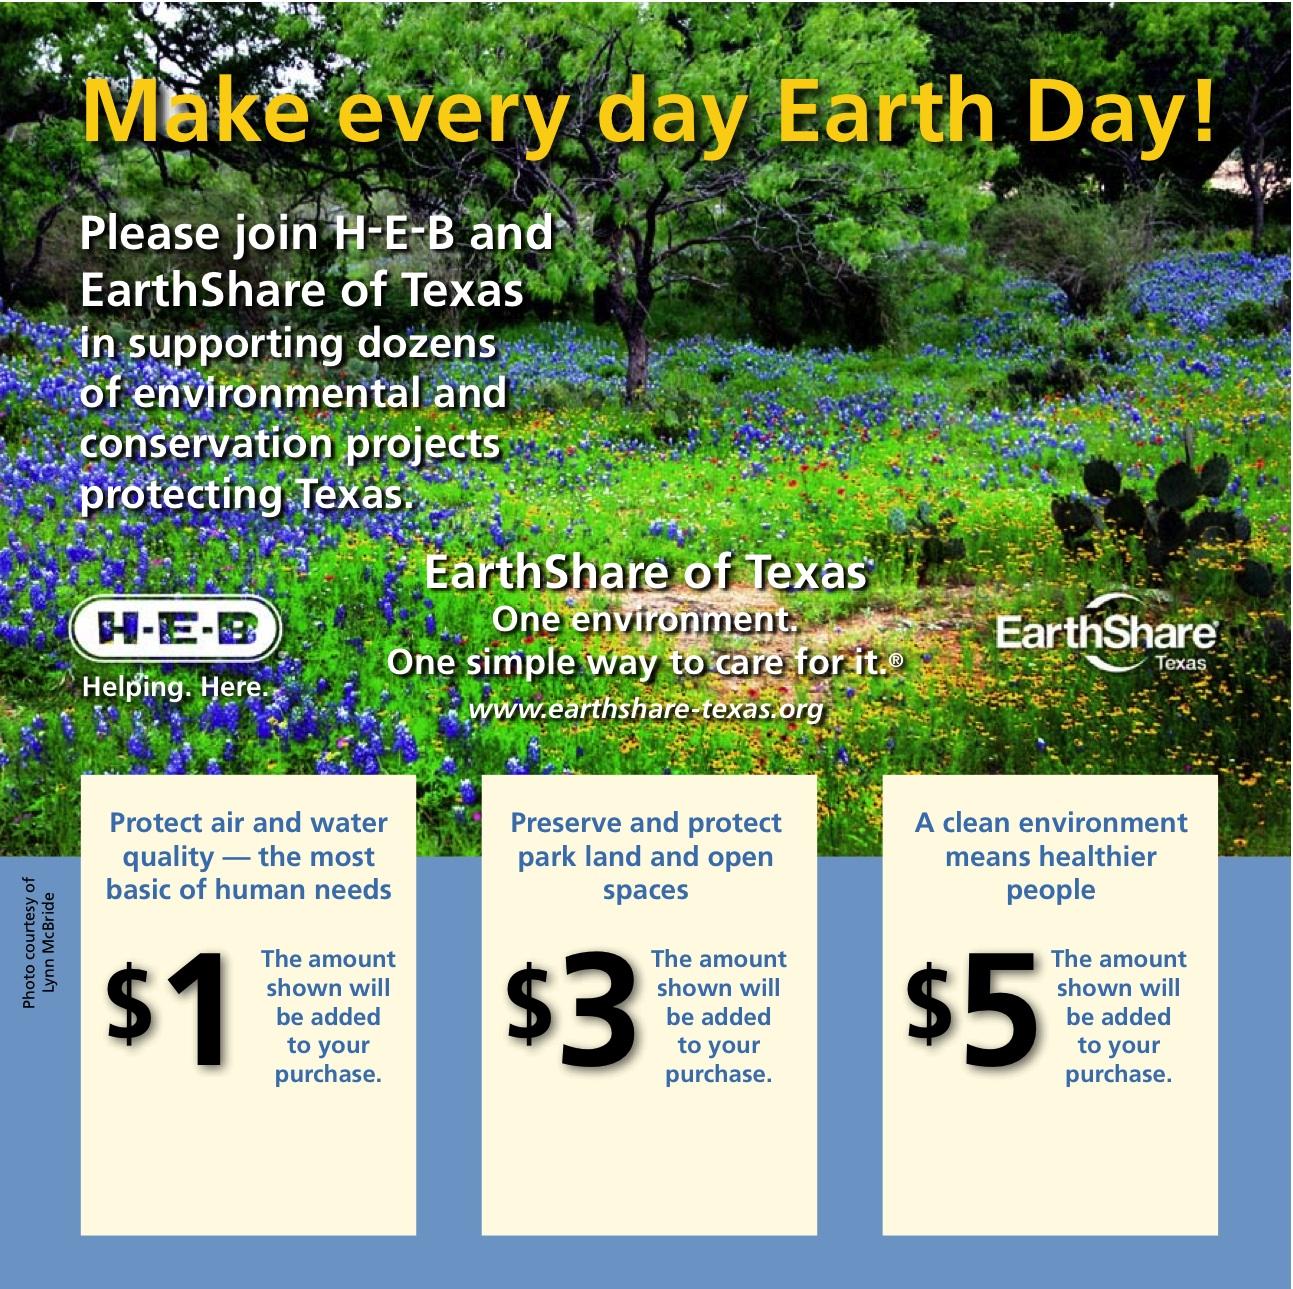 April is Earthday, give at HEB to Earthshare